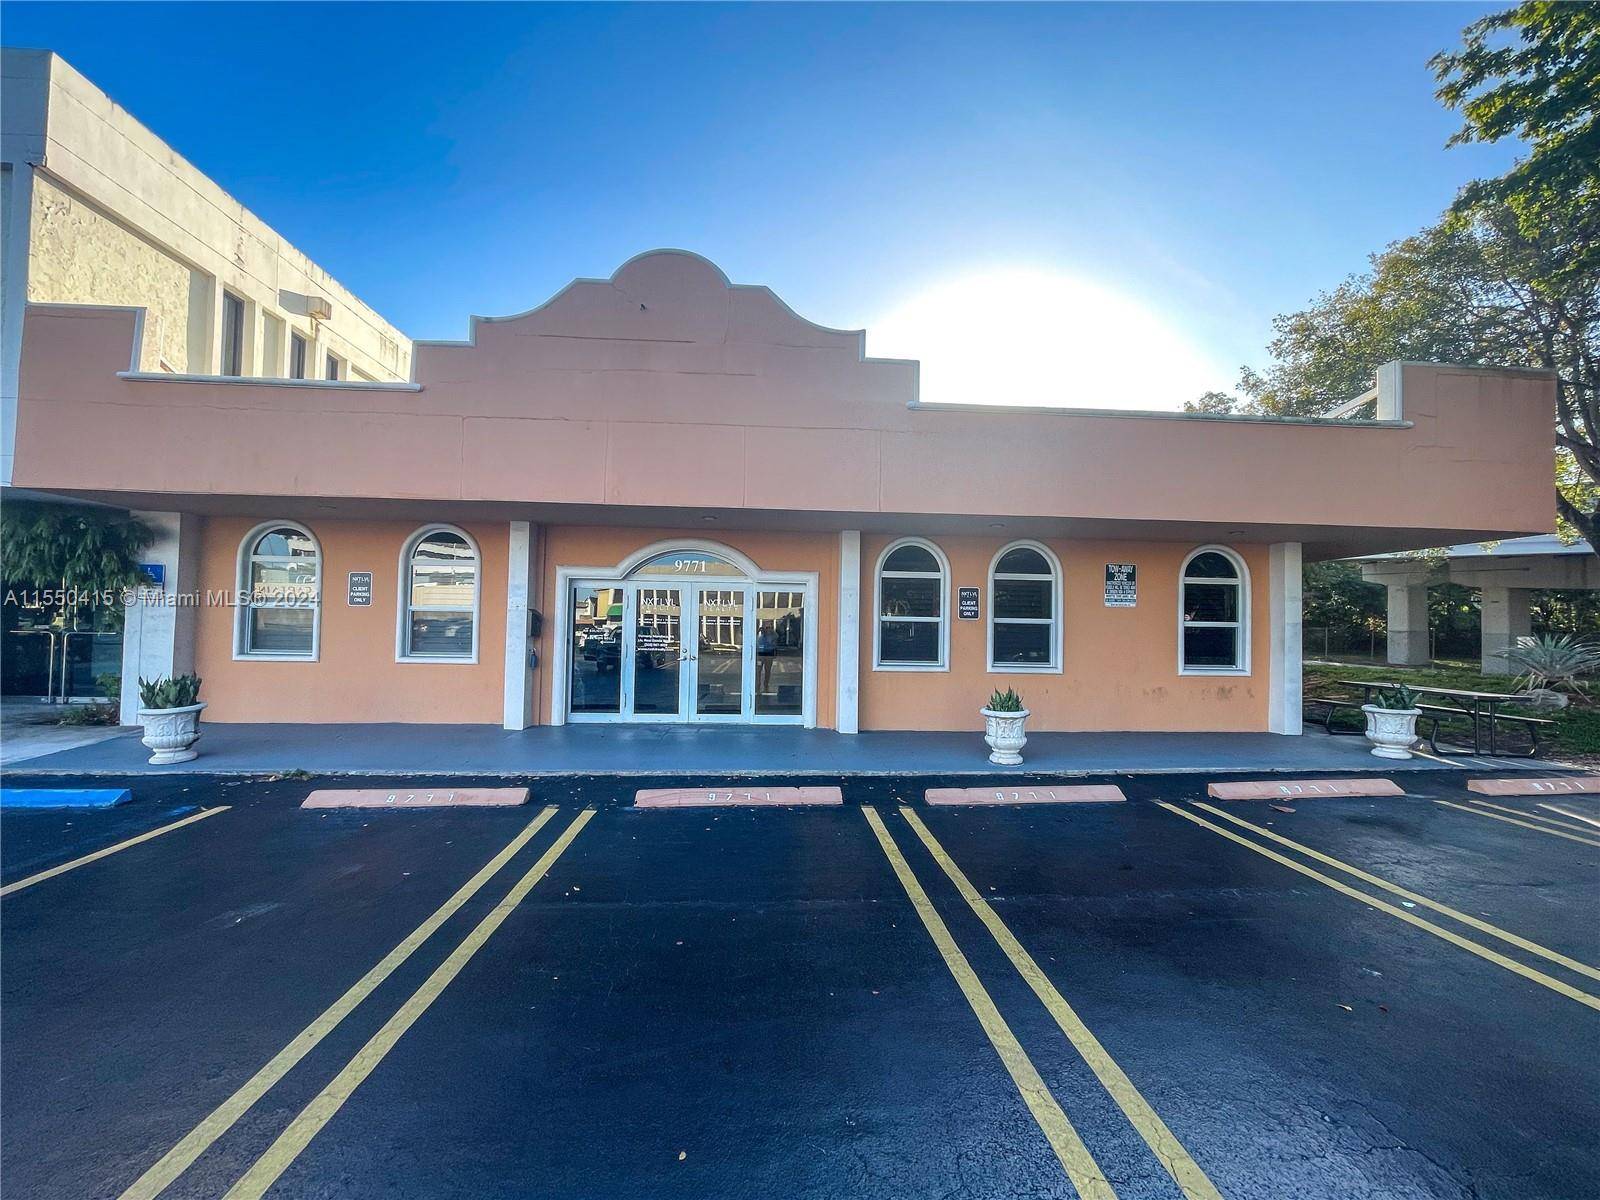 Well maintained building Renovated interiors Ample free parking BU 1 zoning, Restricted Commercial Development, Village of Pinecrest, FL Strategically located business hub Immediate access to major transportation arteries South Dixie ...